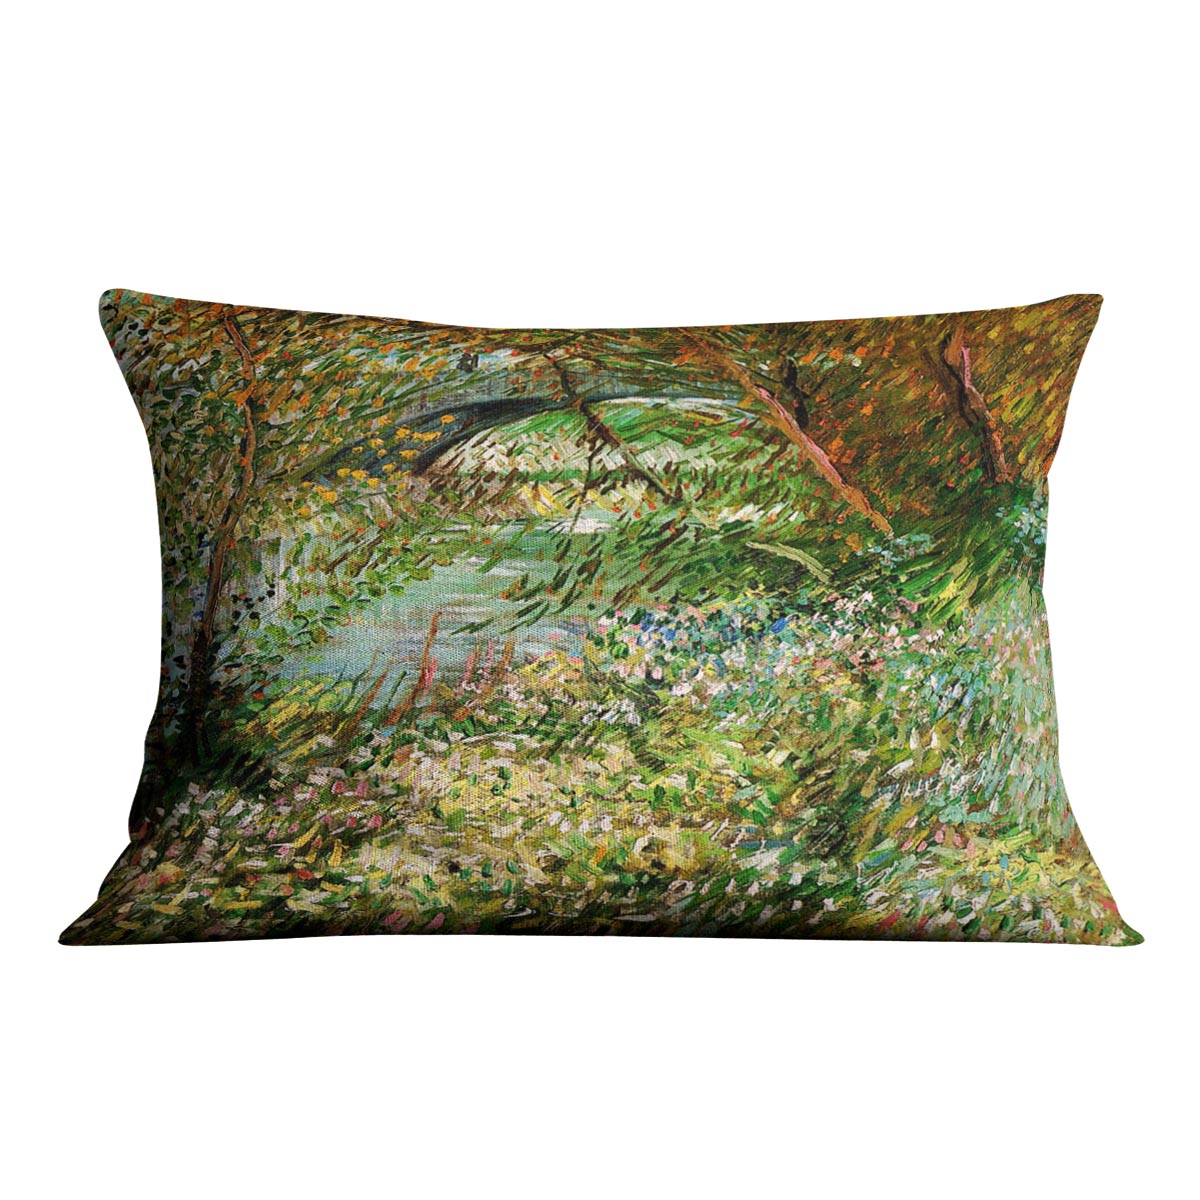 Banks of the Seine with Pont de Clichy in the Spring by Van Gogh Cushion